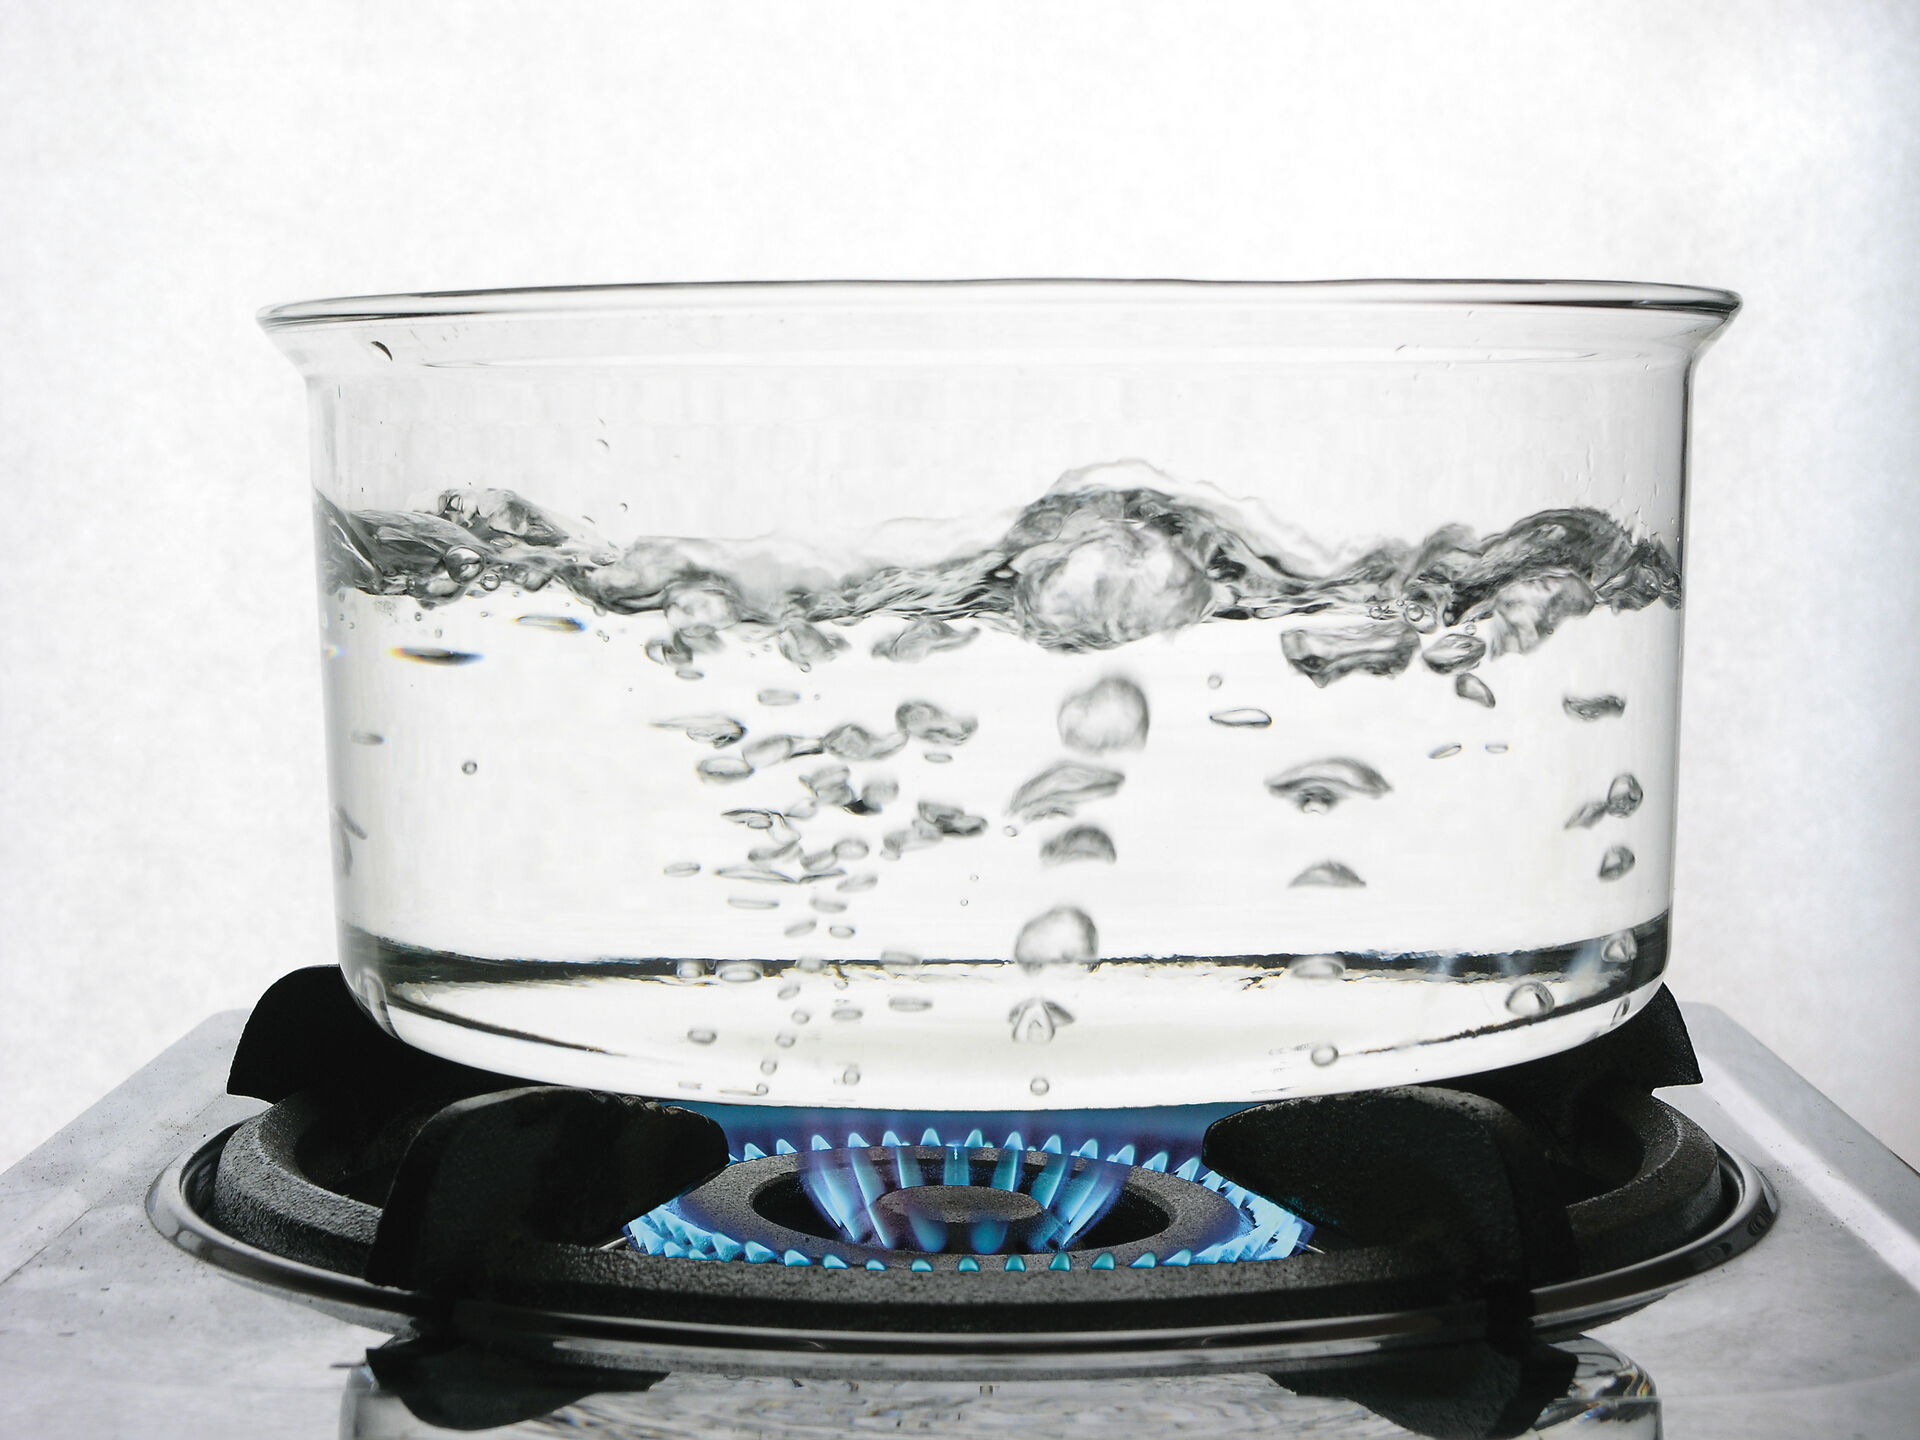 A Better Way to Boil: Comparing Methods of Purifying Water at Home